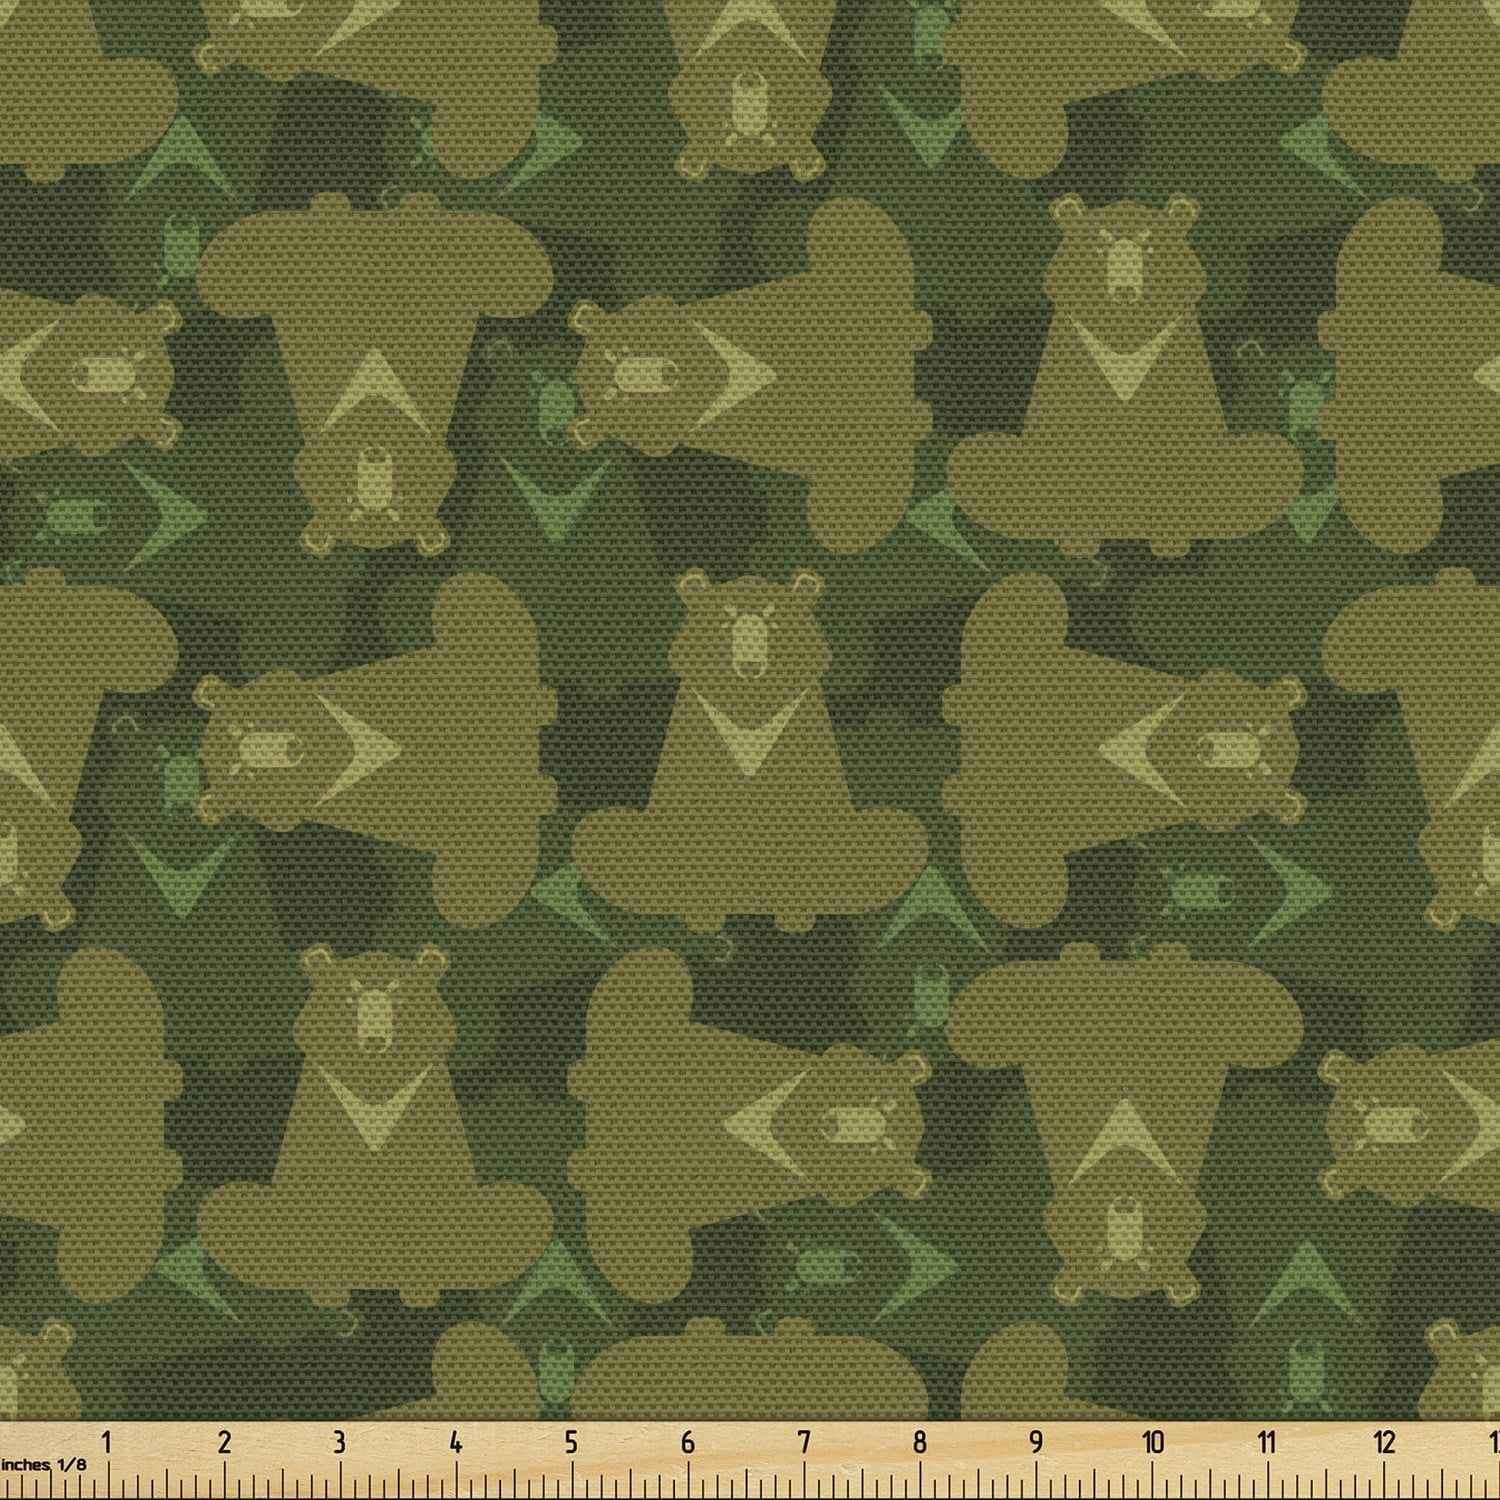 Camo Fabric by the Yard, Camouflage Inspired Concept with Bear Wild Animals  Abstract Design Print, Decorative Upholstery Fabric for Chairs & Home  Accents, 5 Yards, Fawn and Hunter Green by Ambesonne -